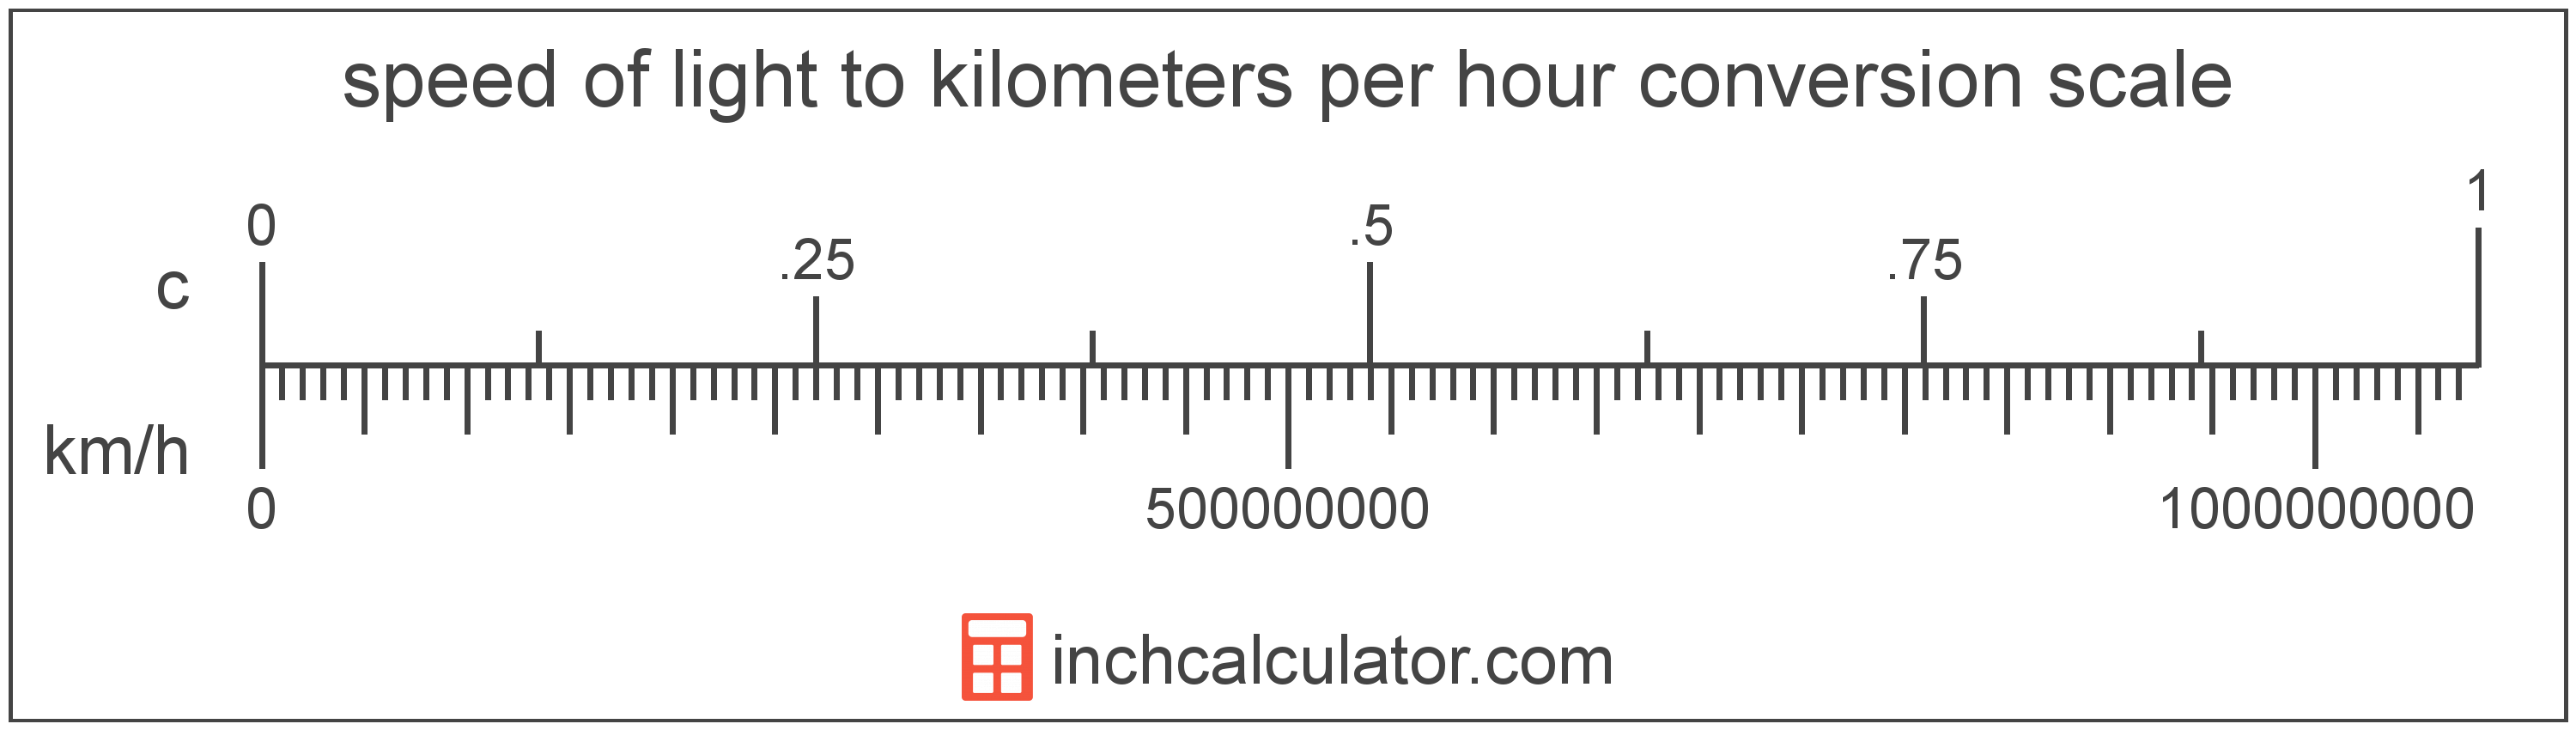 kilometers-per-hour-to-speed-of-light-conversion-km-h-to-c